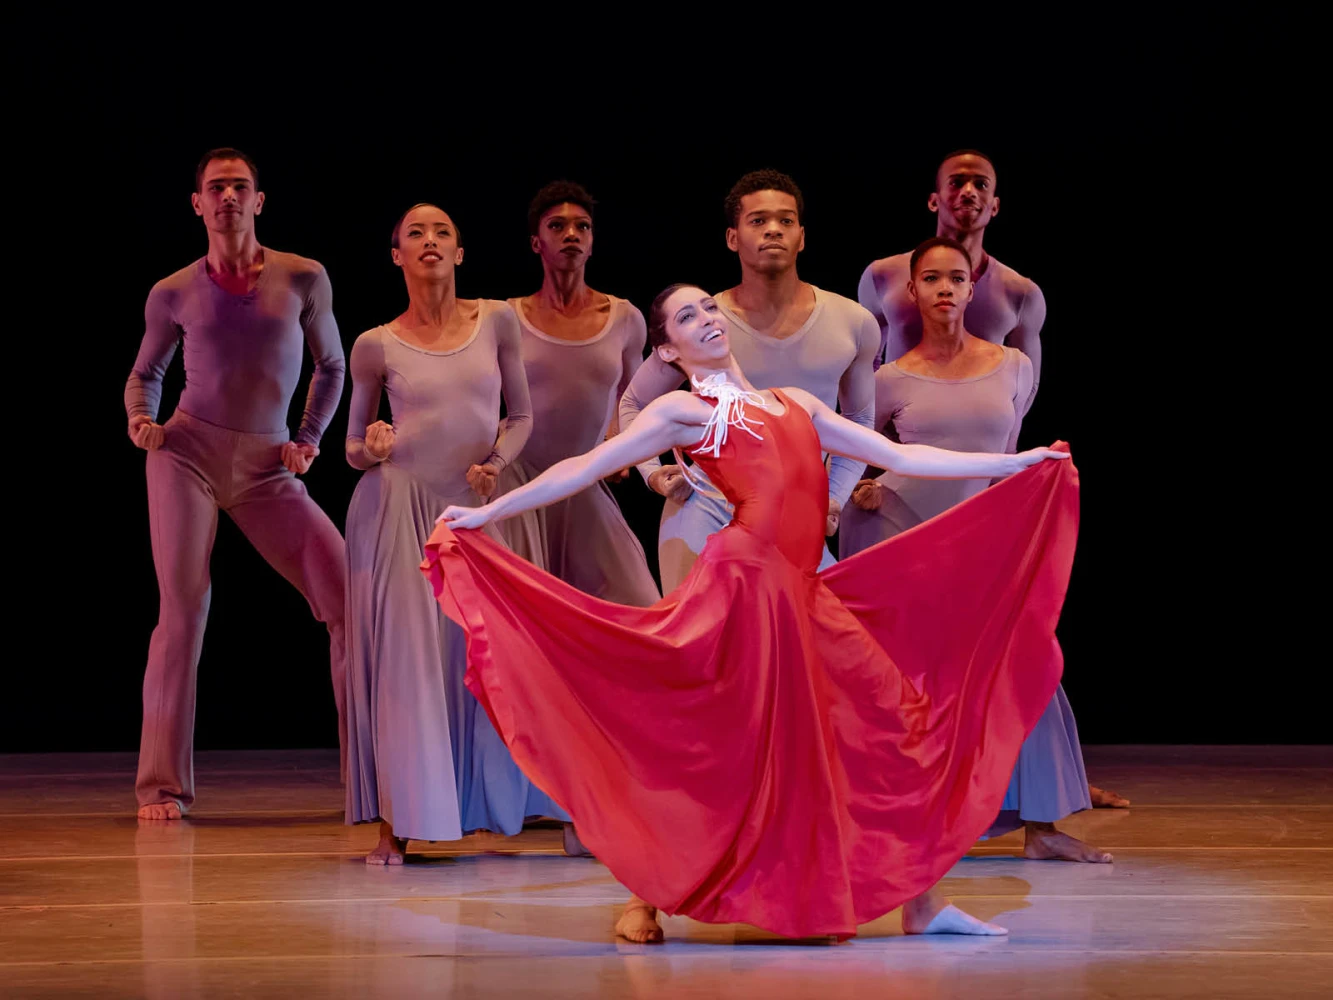 Alvin Ailey American Dance Theater: What to expect - 2